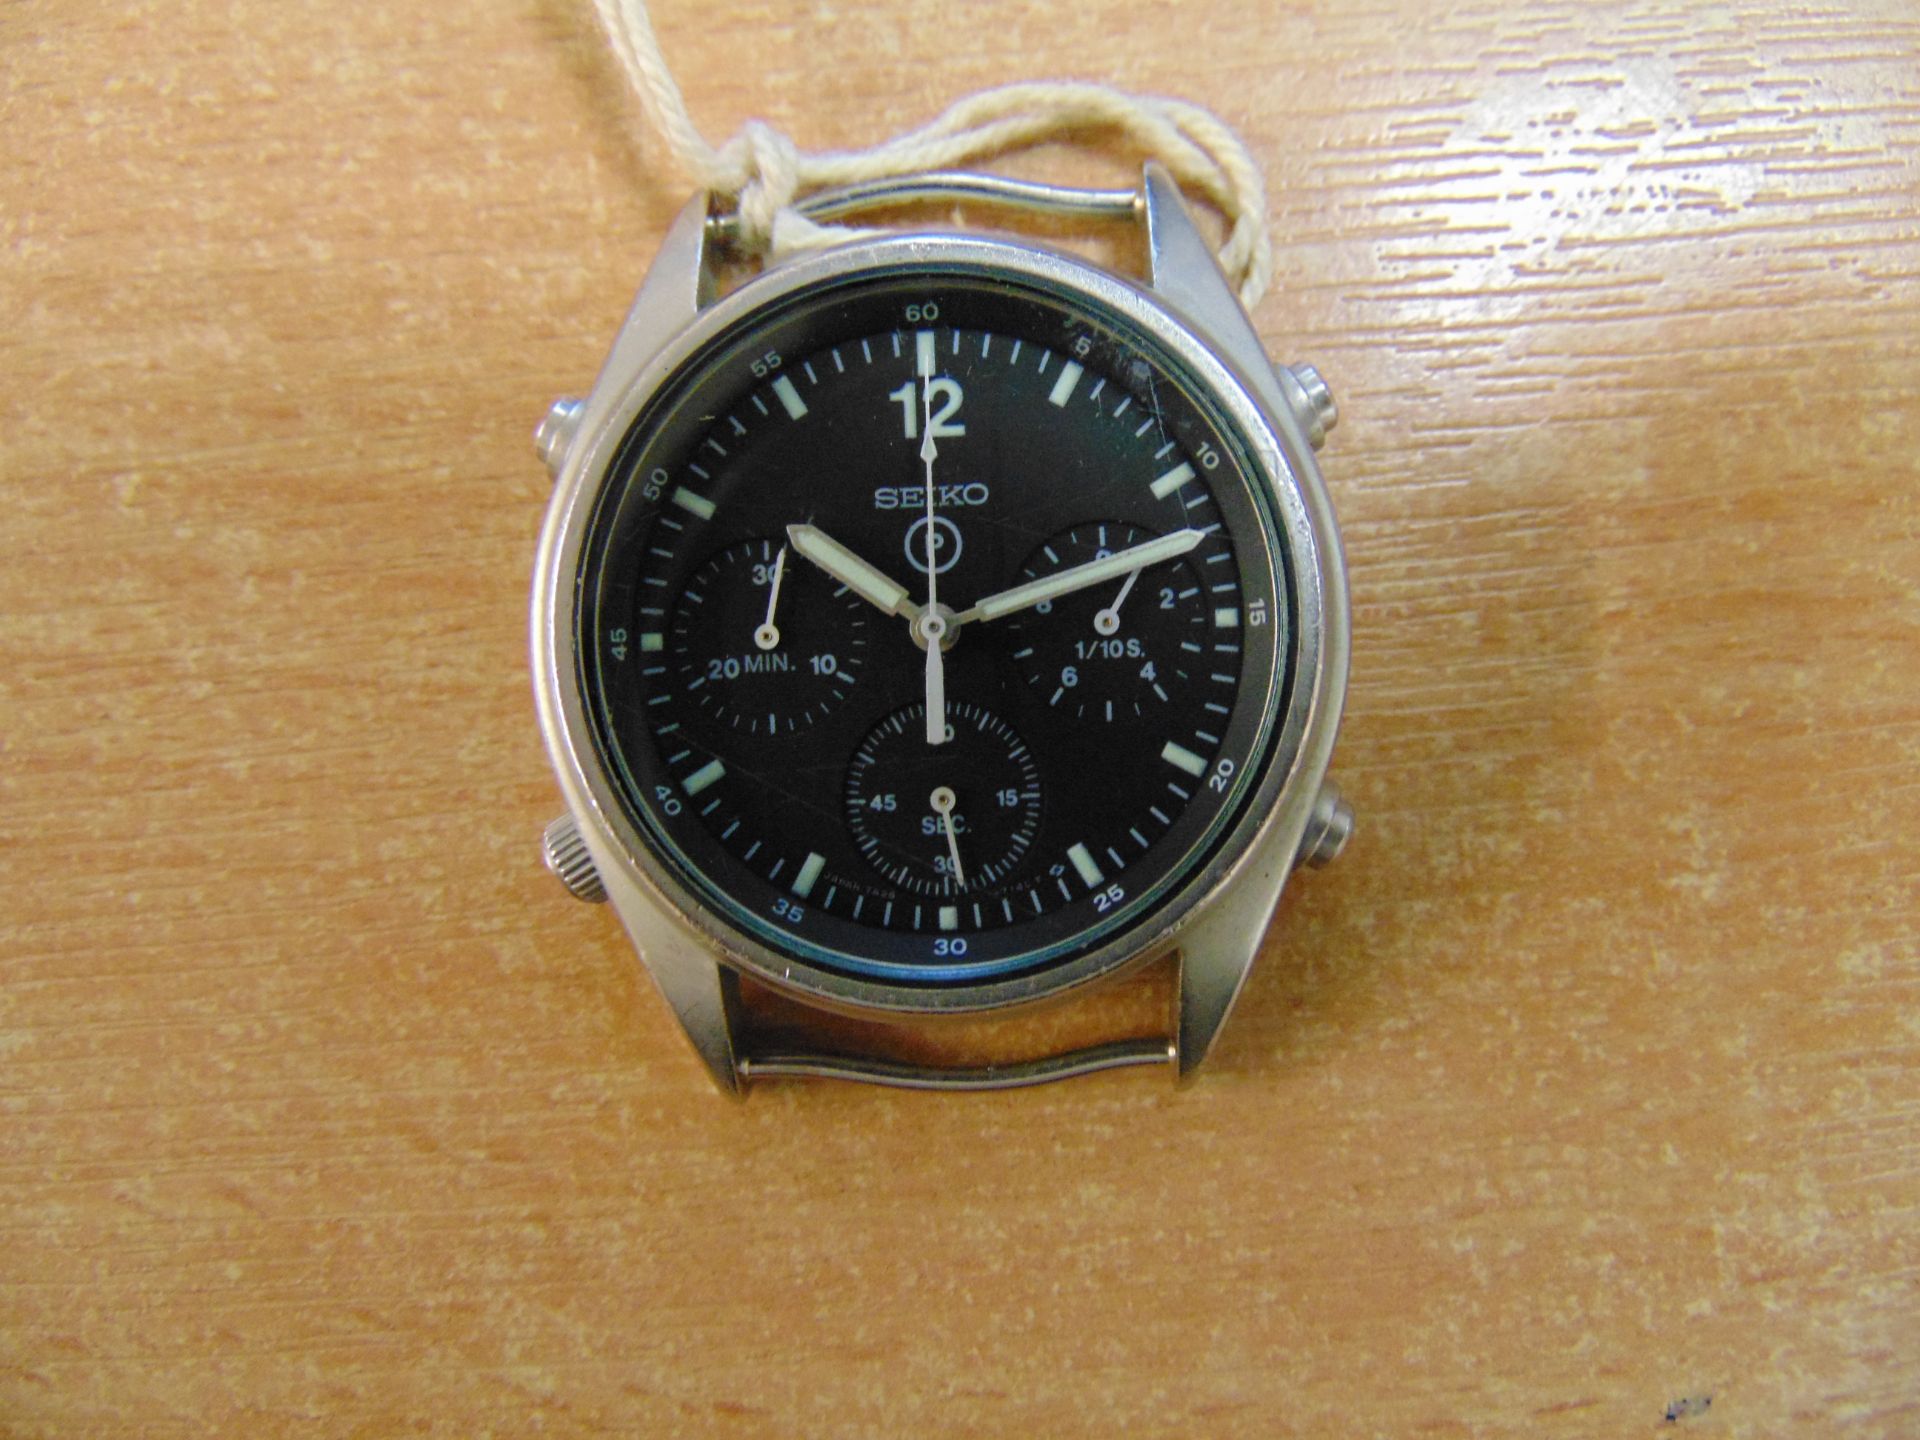 RARE SEIKO GEN 1 PILOTS CHRONO RAF HARRIER FORCE ISSUE NATO MARKS 1988 DATE - Image 2 of 4